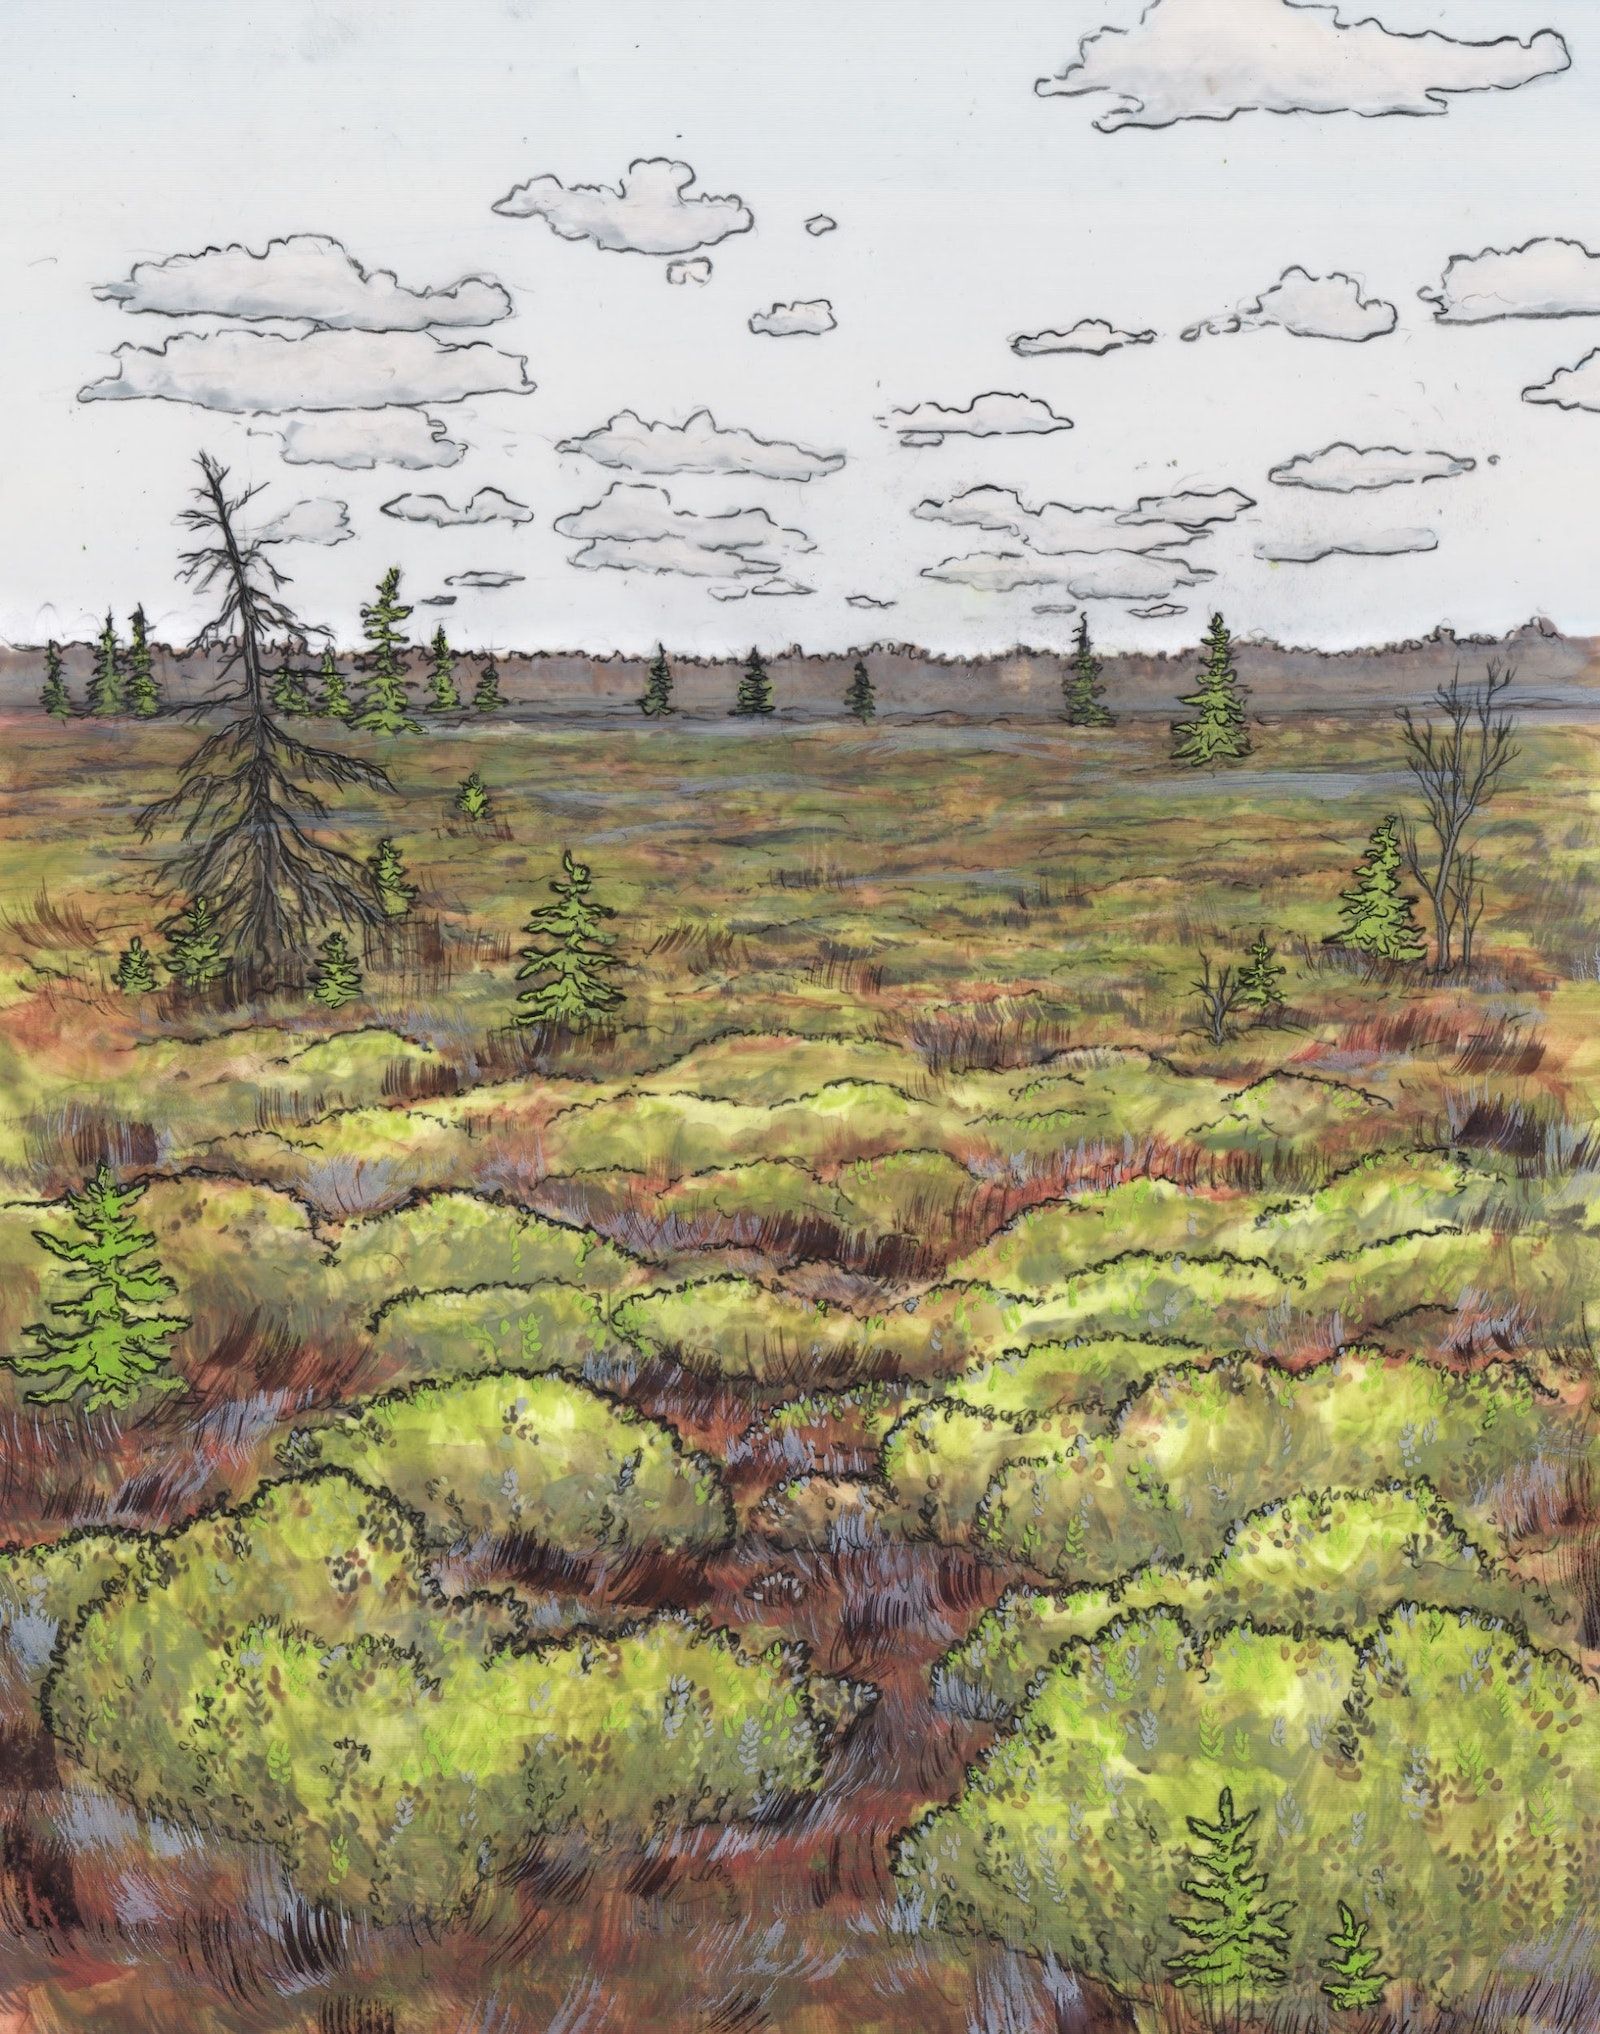 Hand drawn image of wetlands containing Spagnum moss.